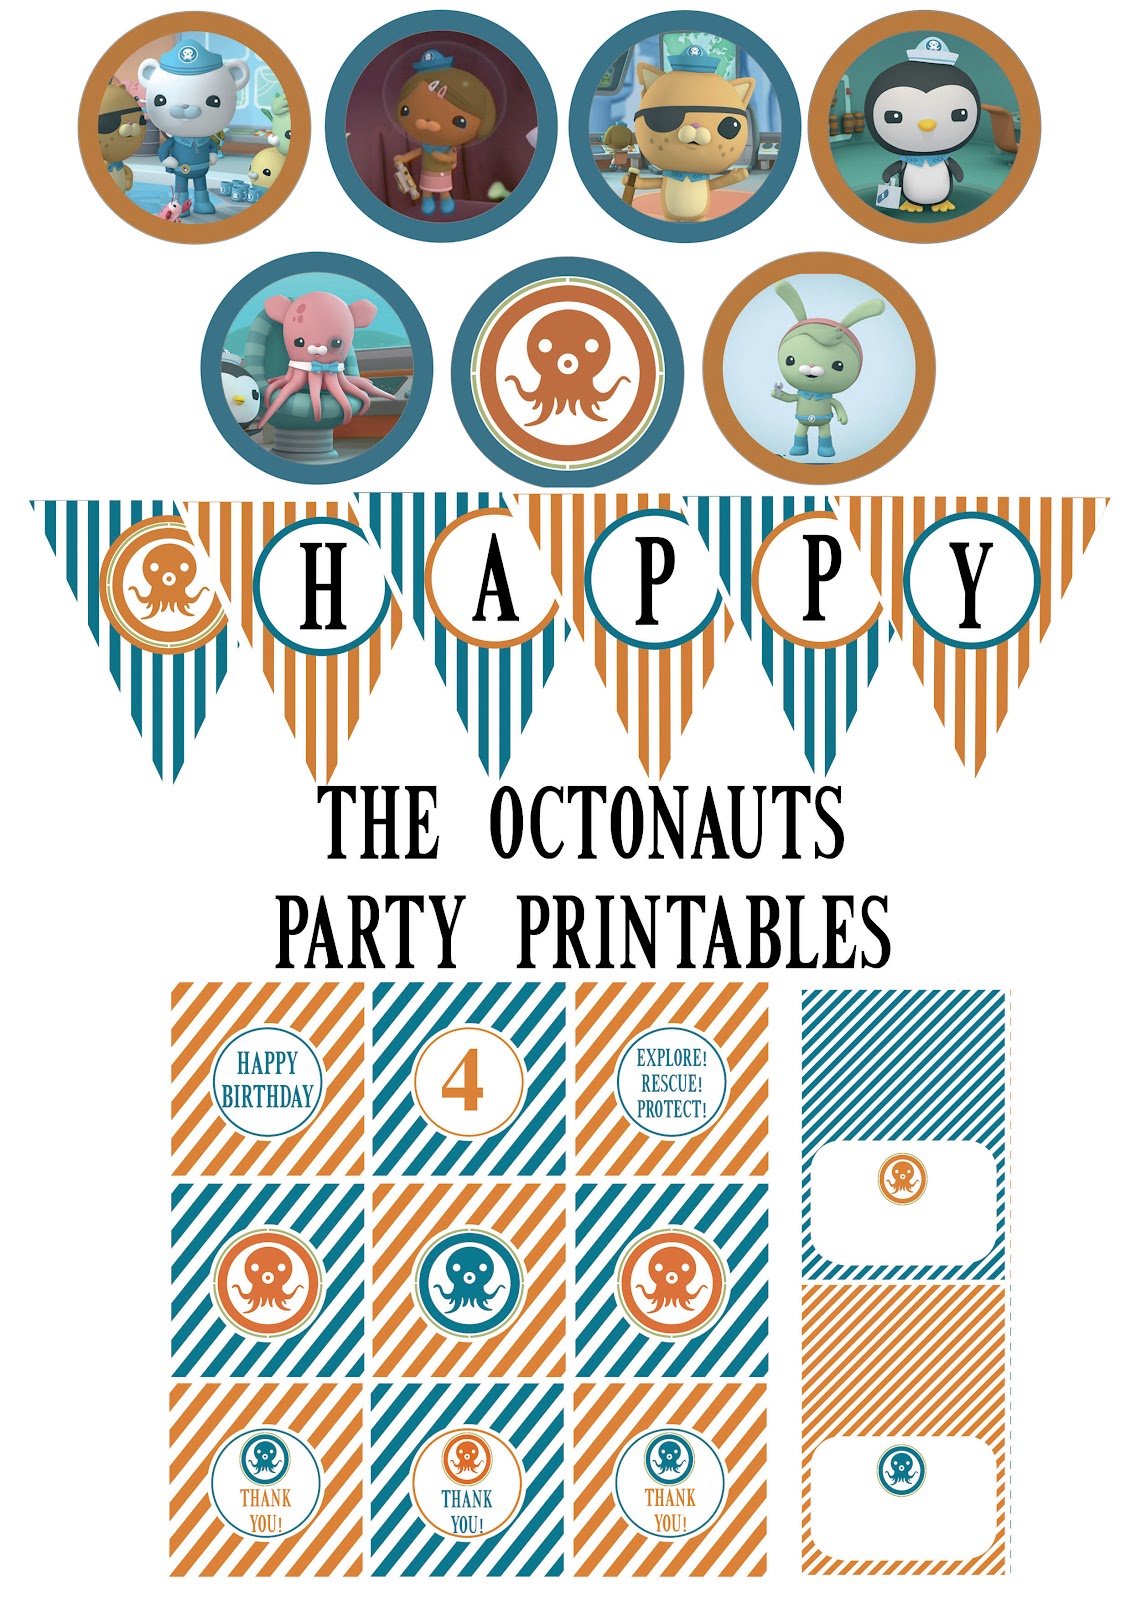 Octonauts Party On Pinterest Party Invitations Fish Decorations And Party Backdrops